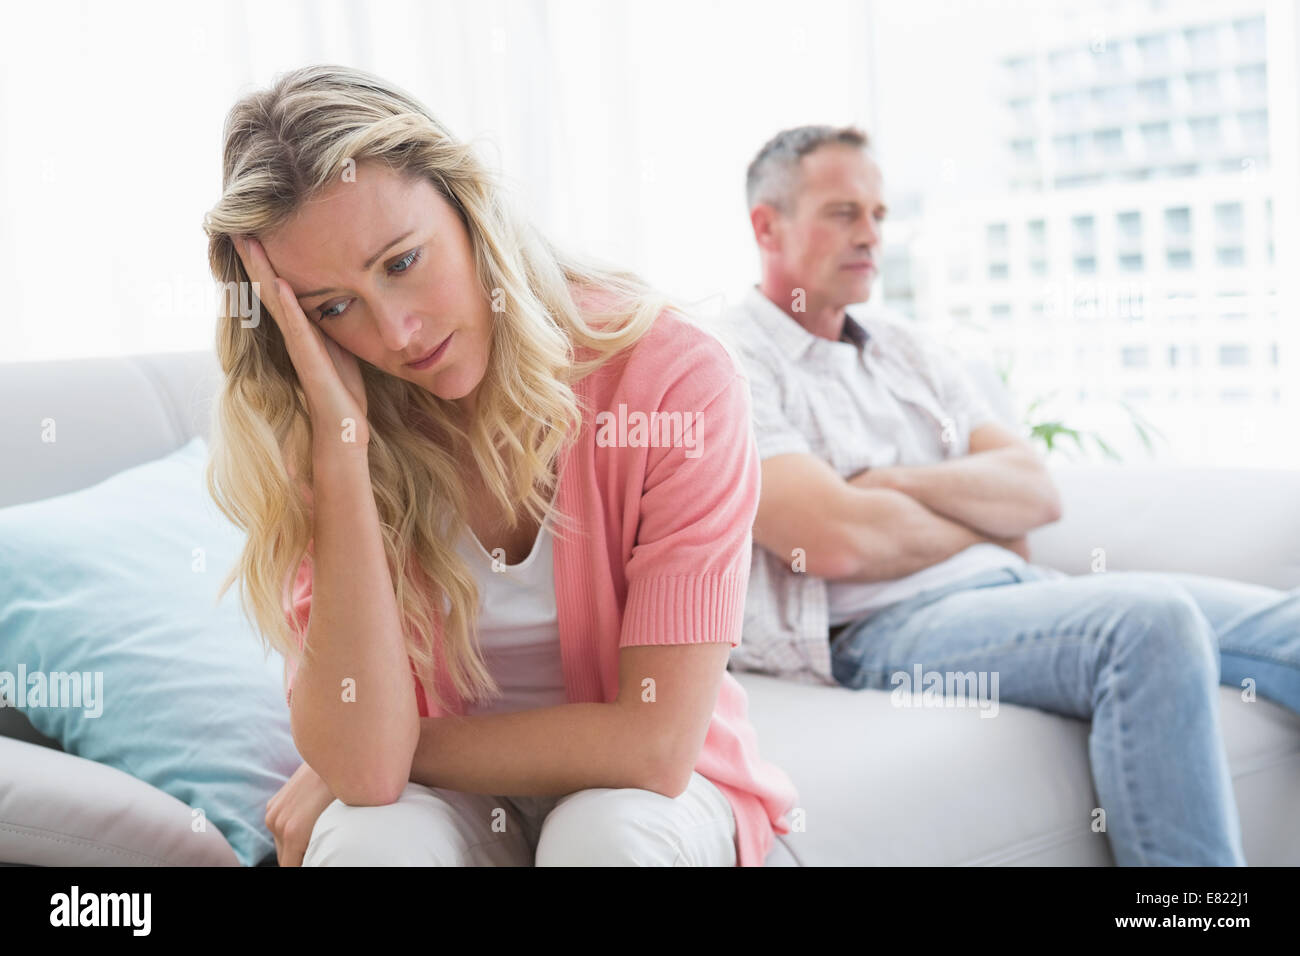 Unhappy couple are stern and having troubles Stock Photo